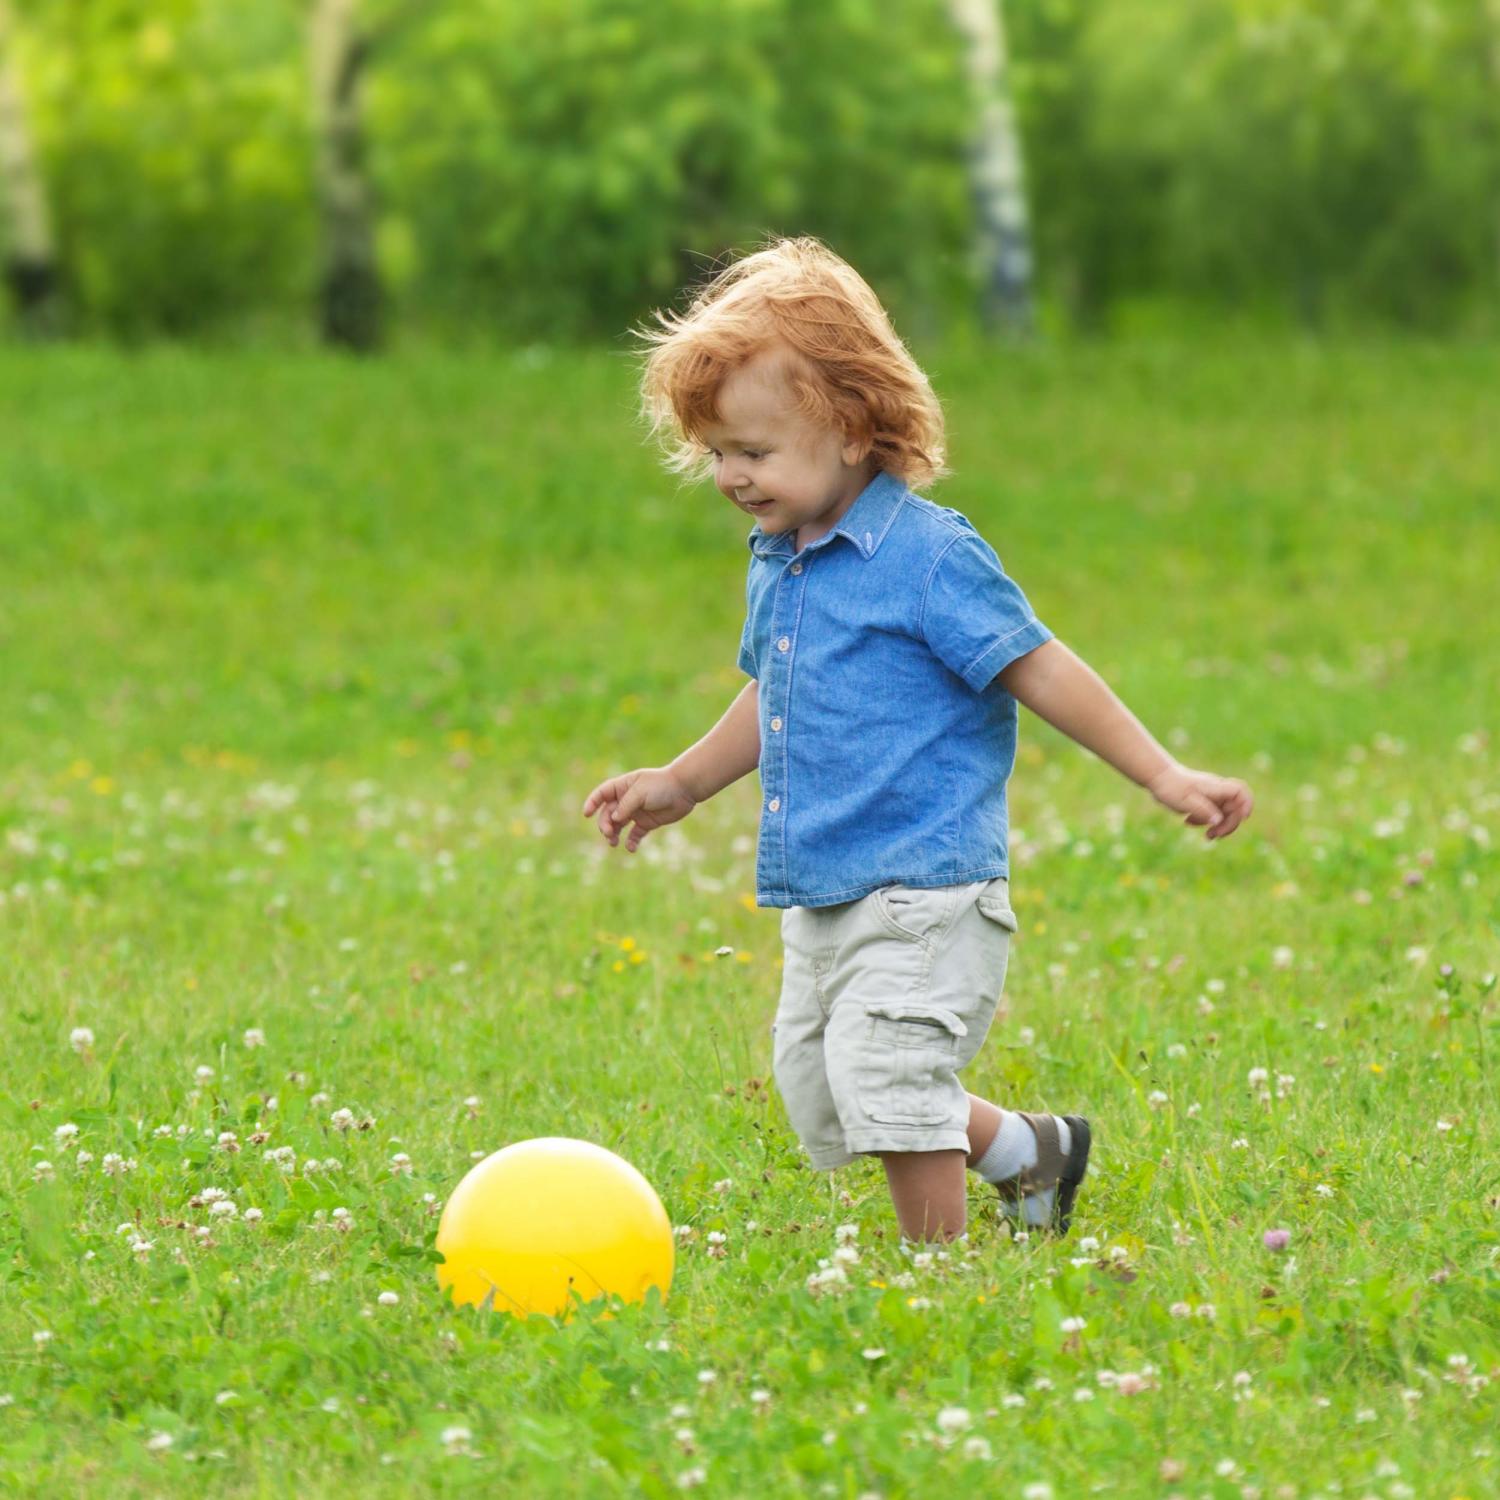 6 Games to Play With a Ball | Parenting